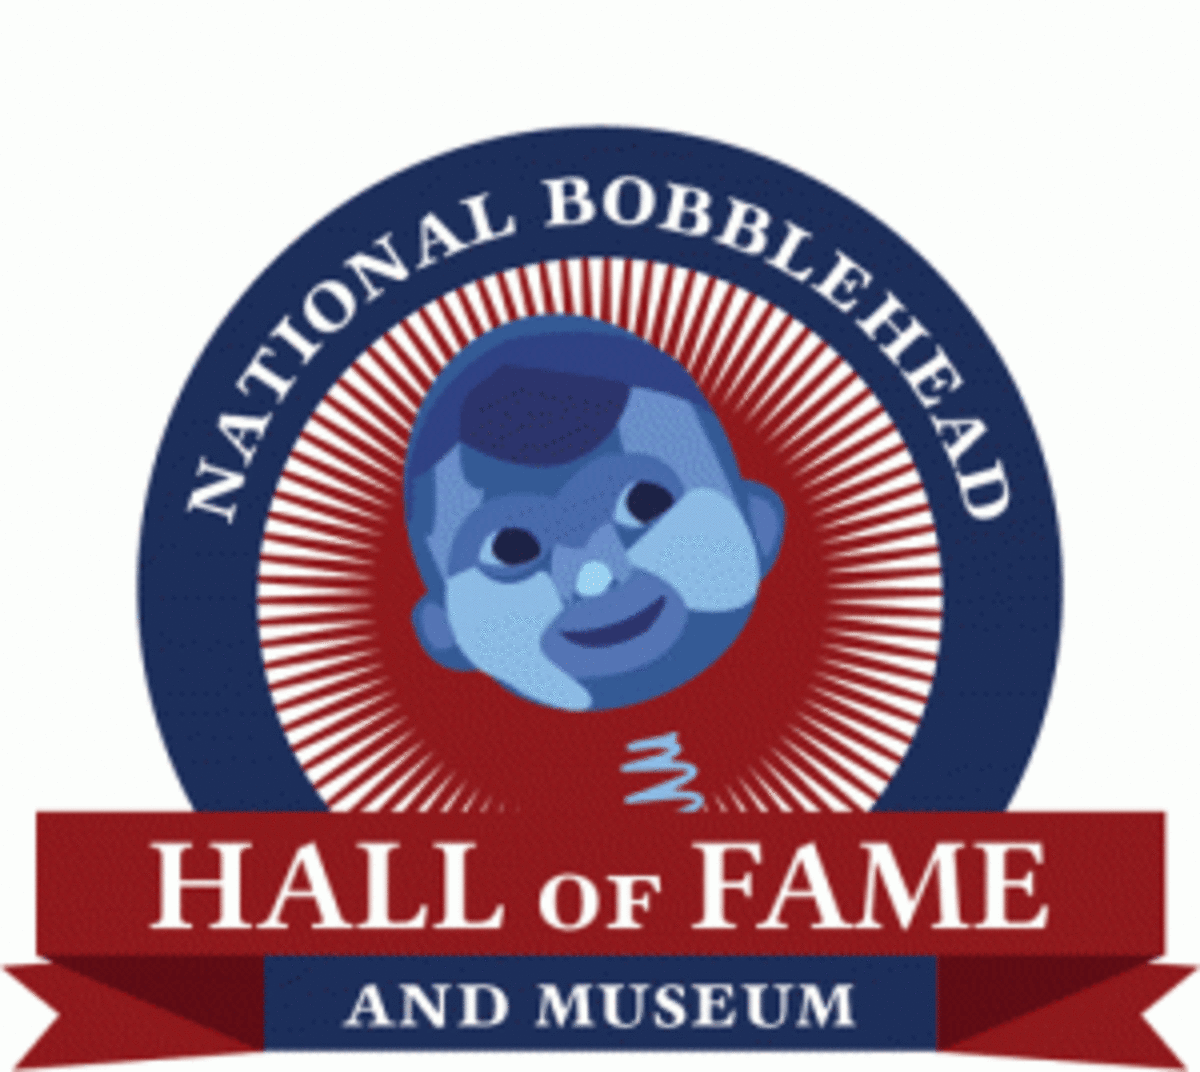 Bobblehead fans will undoubtedly flock to Milwaukee, Wis. come 2016, as the National Bobblehead Hall of Fame and Museum plans for a grand opening then.